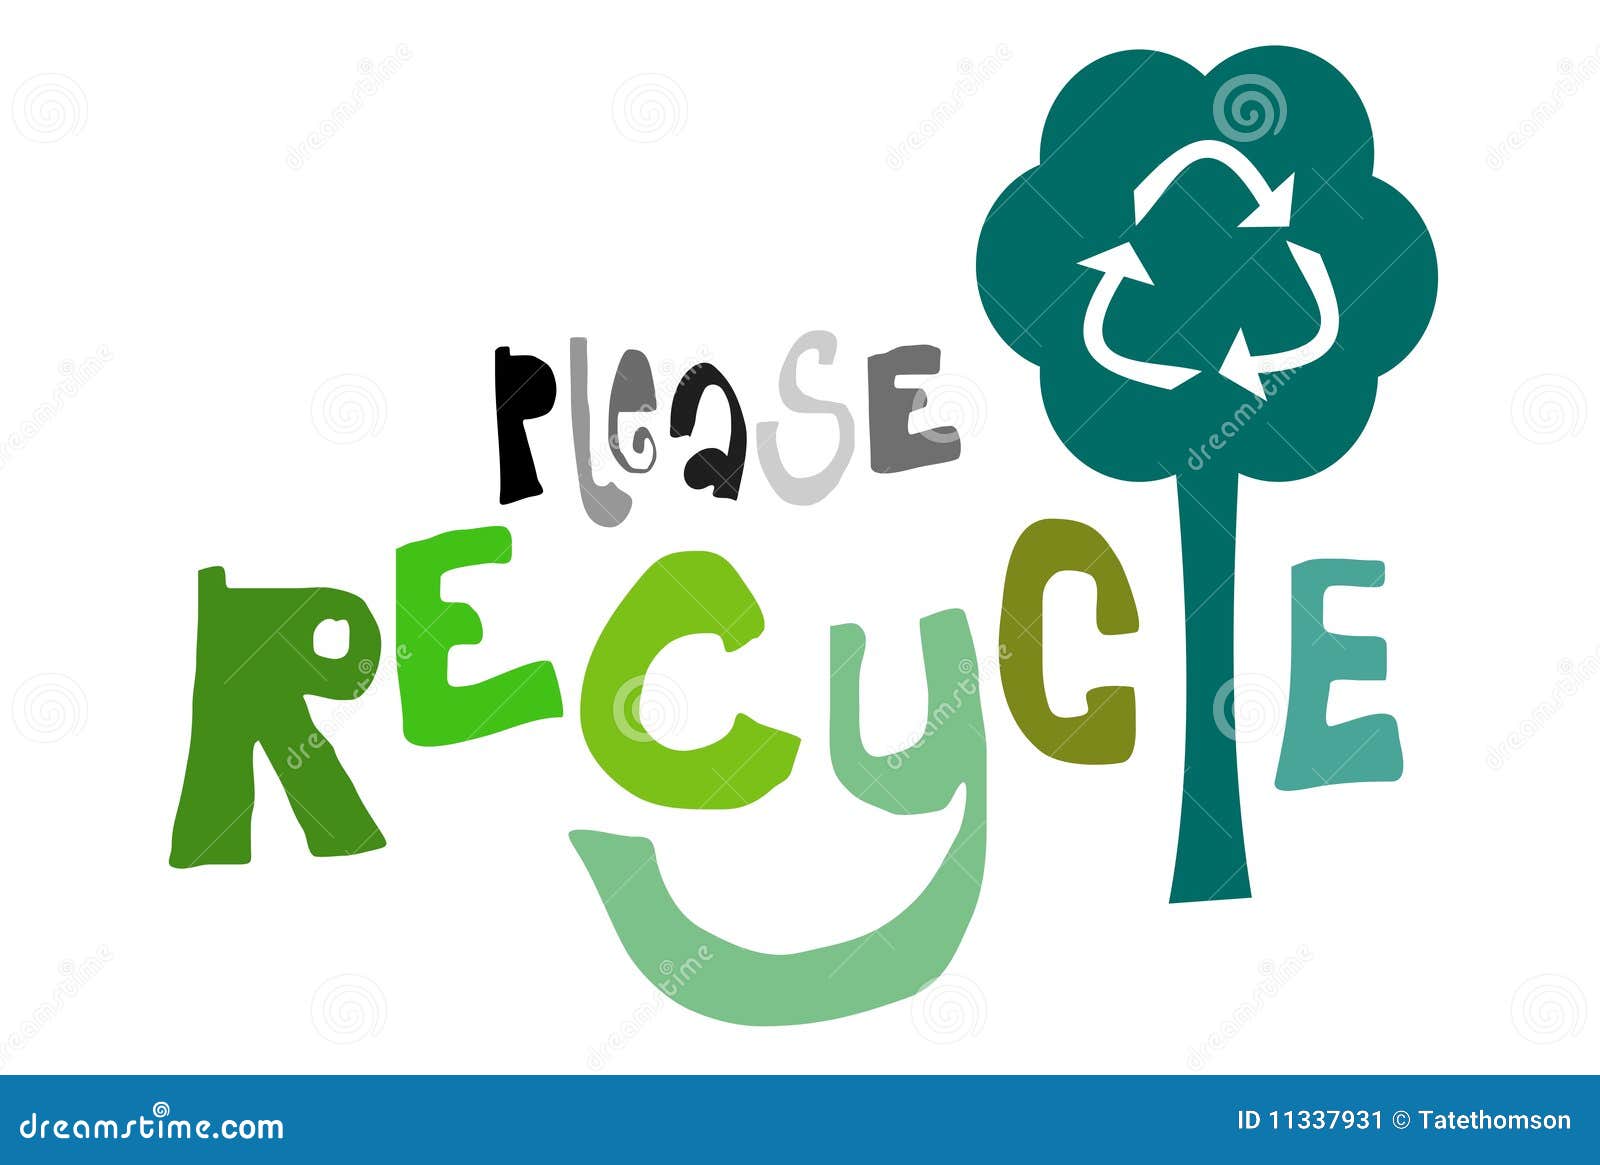 Image result for please recycle